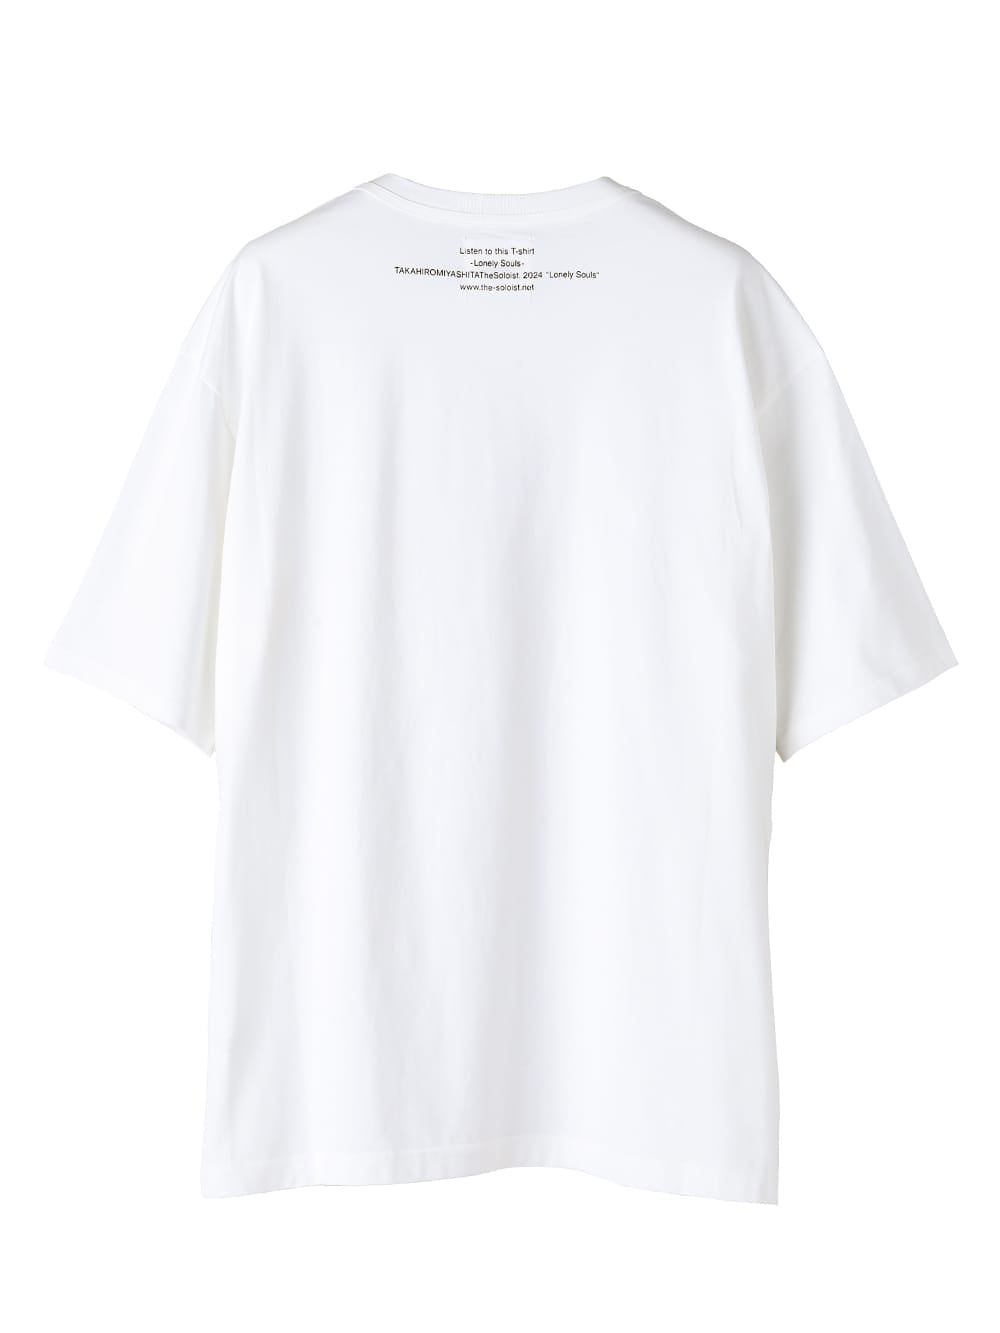 lonely souls. (oversized s/s pocket tee)